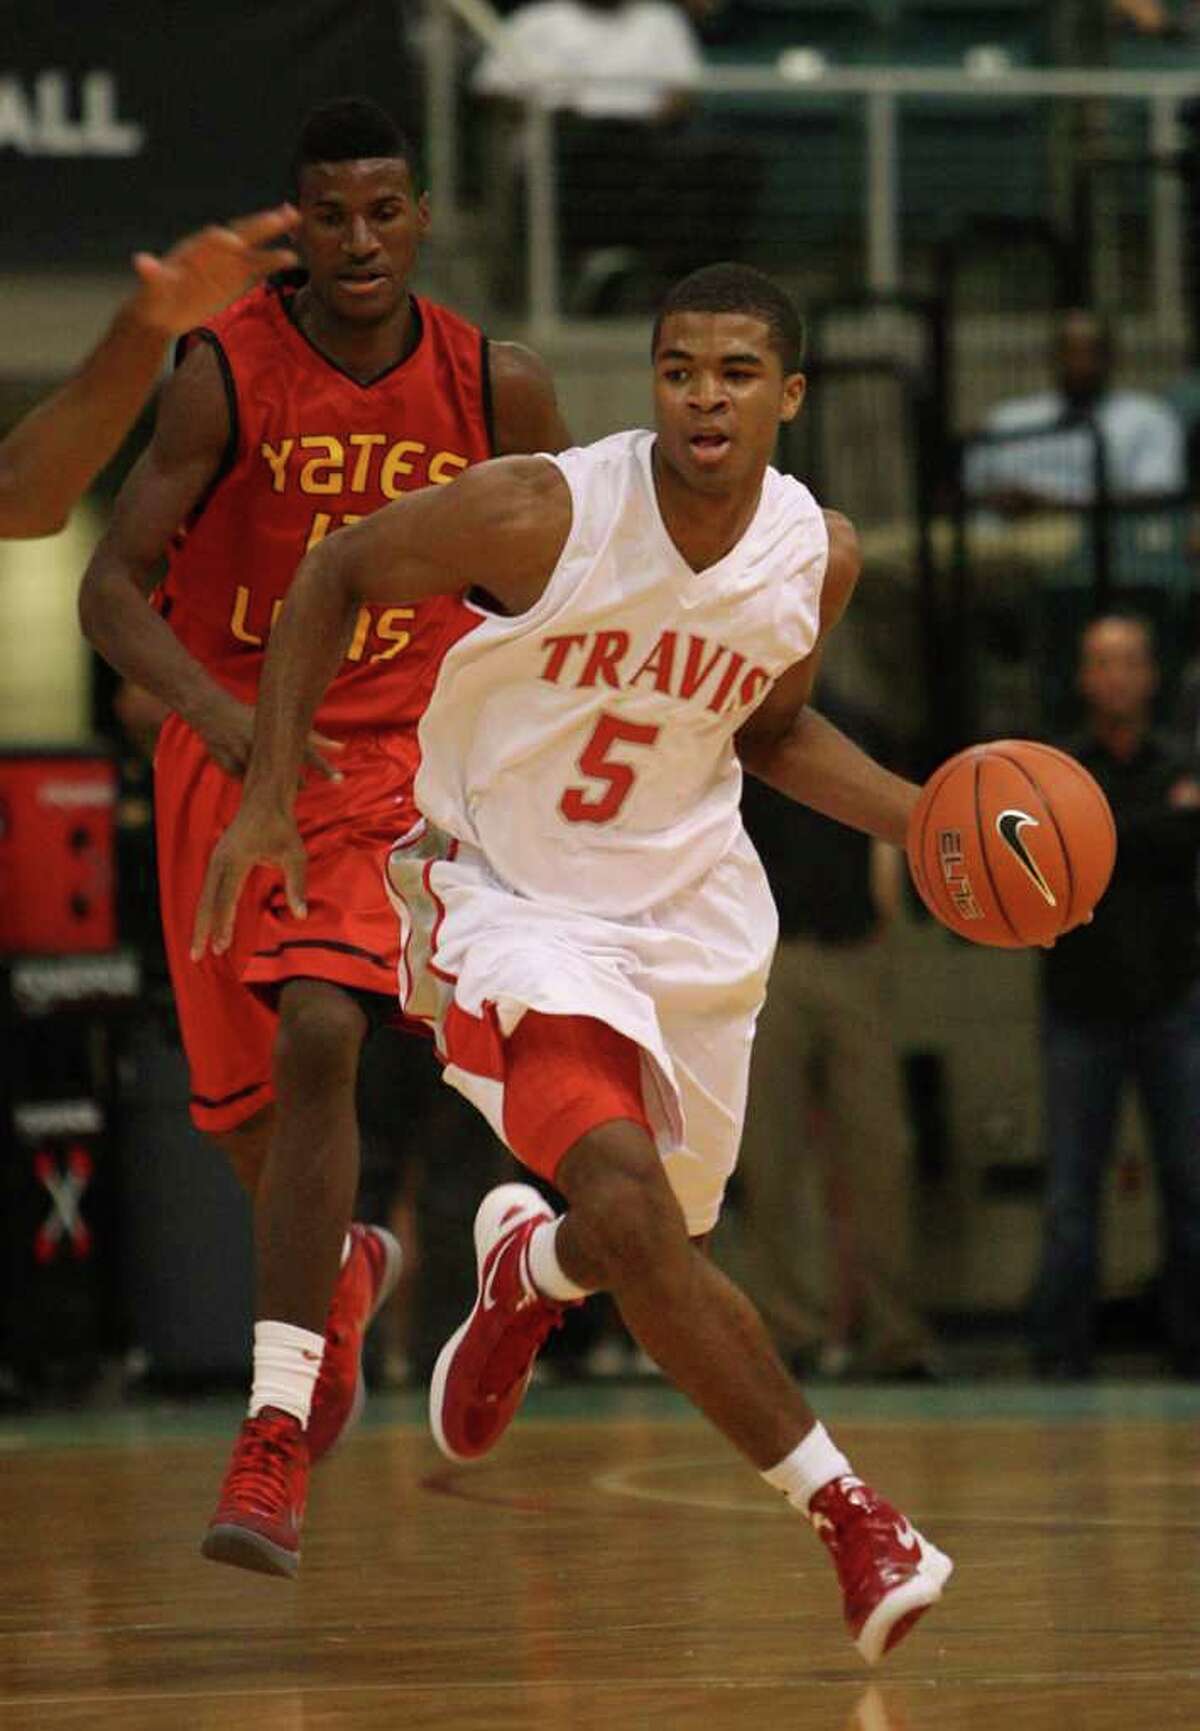 Andrew Harrison Travis The other half of the Harrison twins, Andrew averages 16.4 points per game for the Tigers. He and his brother (both 6-5) make life hard for opponents in every game. Like Aaron, Andrew is considering Baylor, Kentucky, Villanova and Maryland.